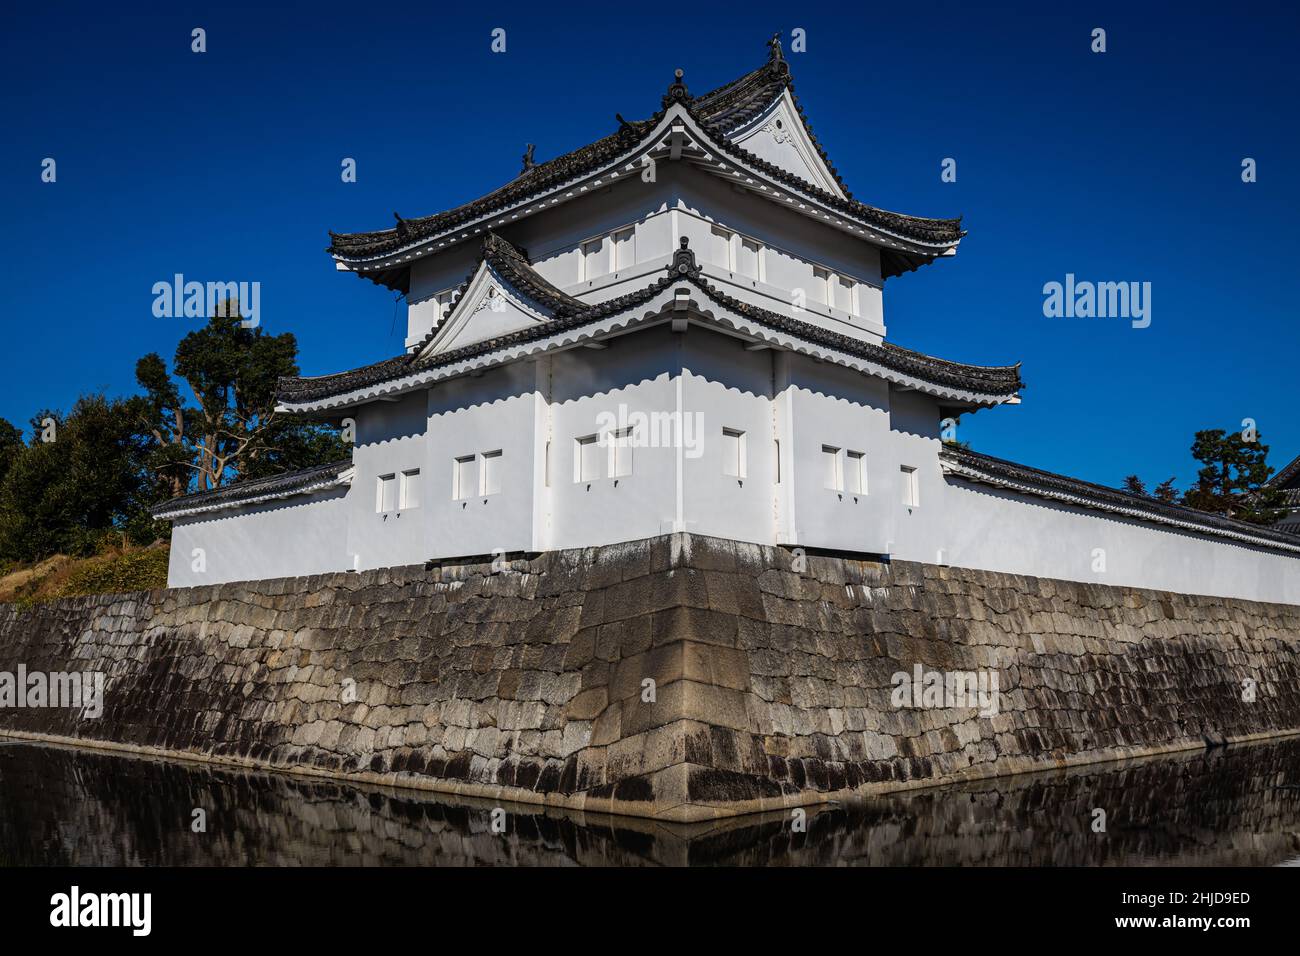 World Heritage Site: Nijo Castle (Nijo-jo), Kyoto, Japan. Built in 1603 and completed in 1626. Residence of the first Tokugawa Shogun Ieyasu.  This is Stock Photo